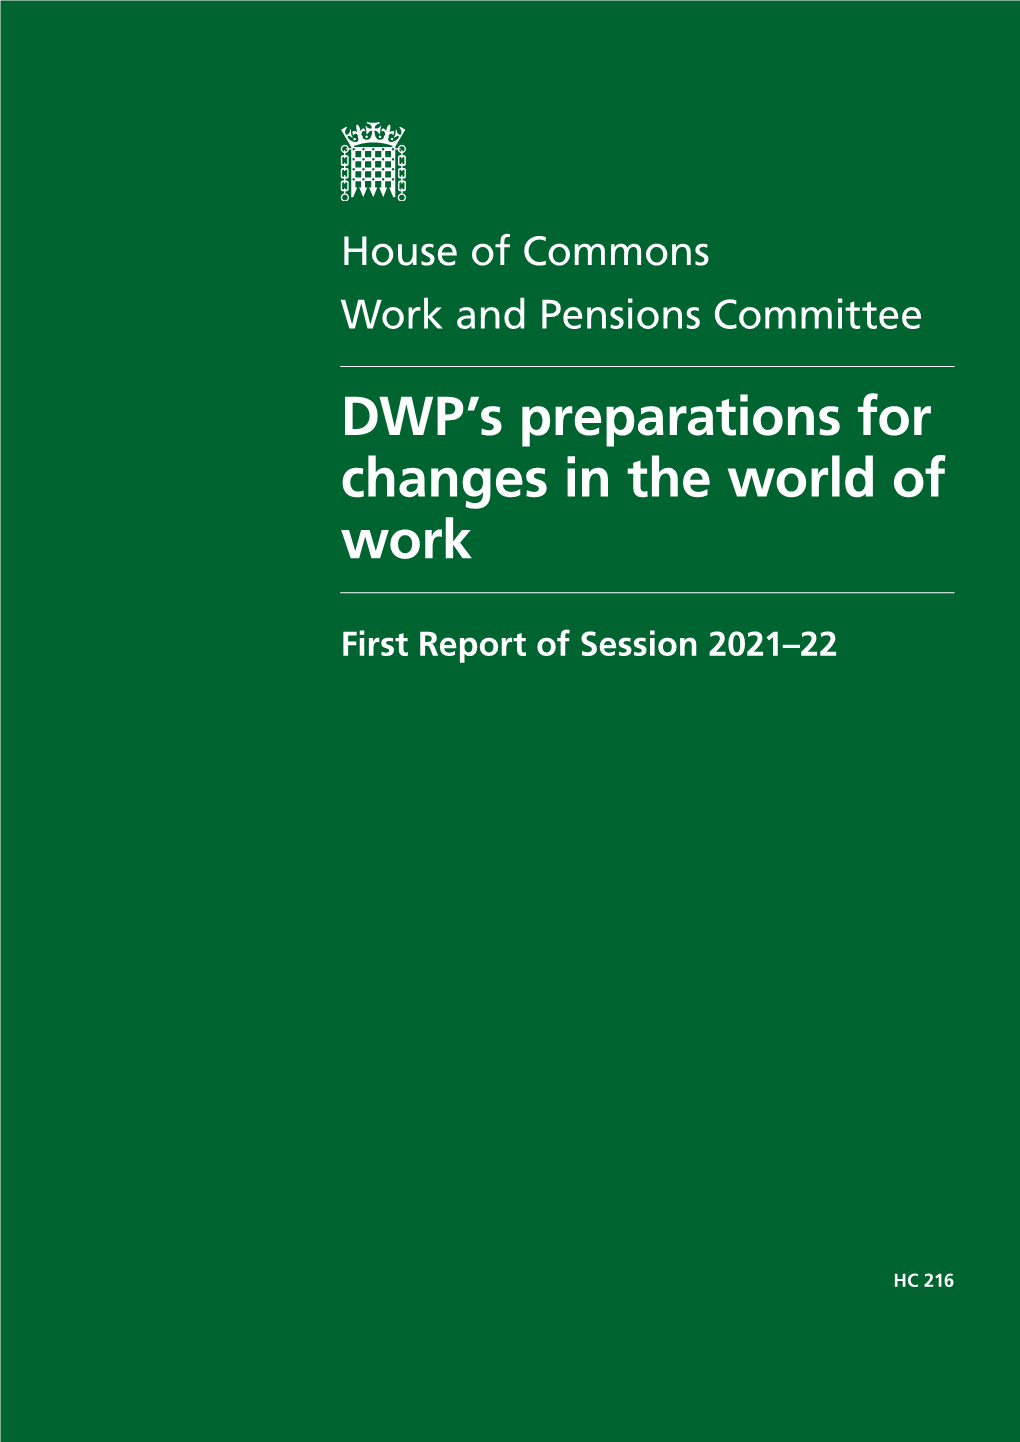 DWP's Preparations for Changes in the World of Work